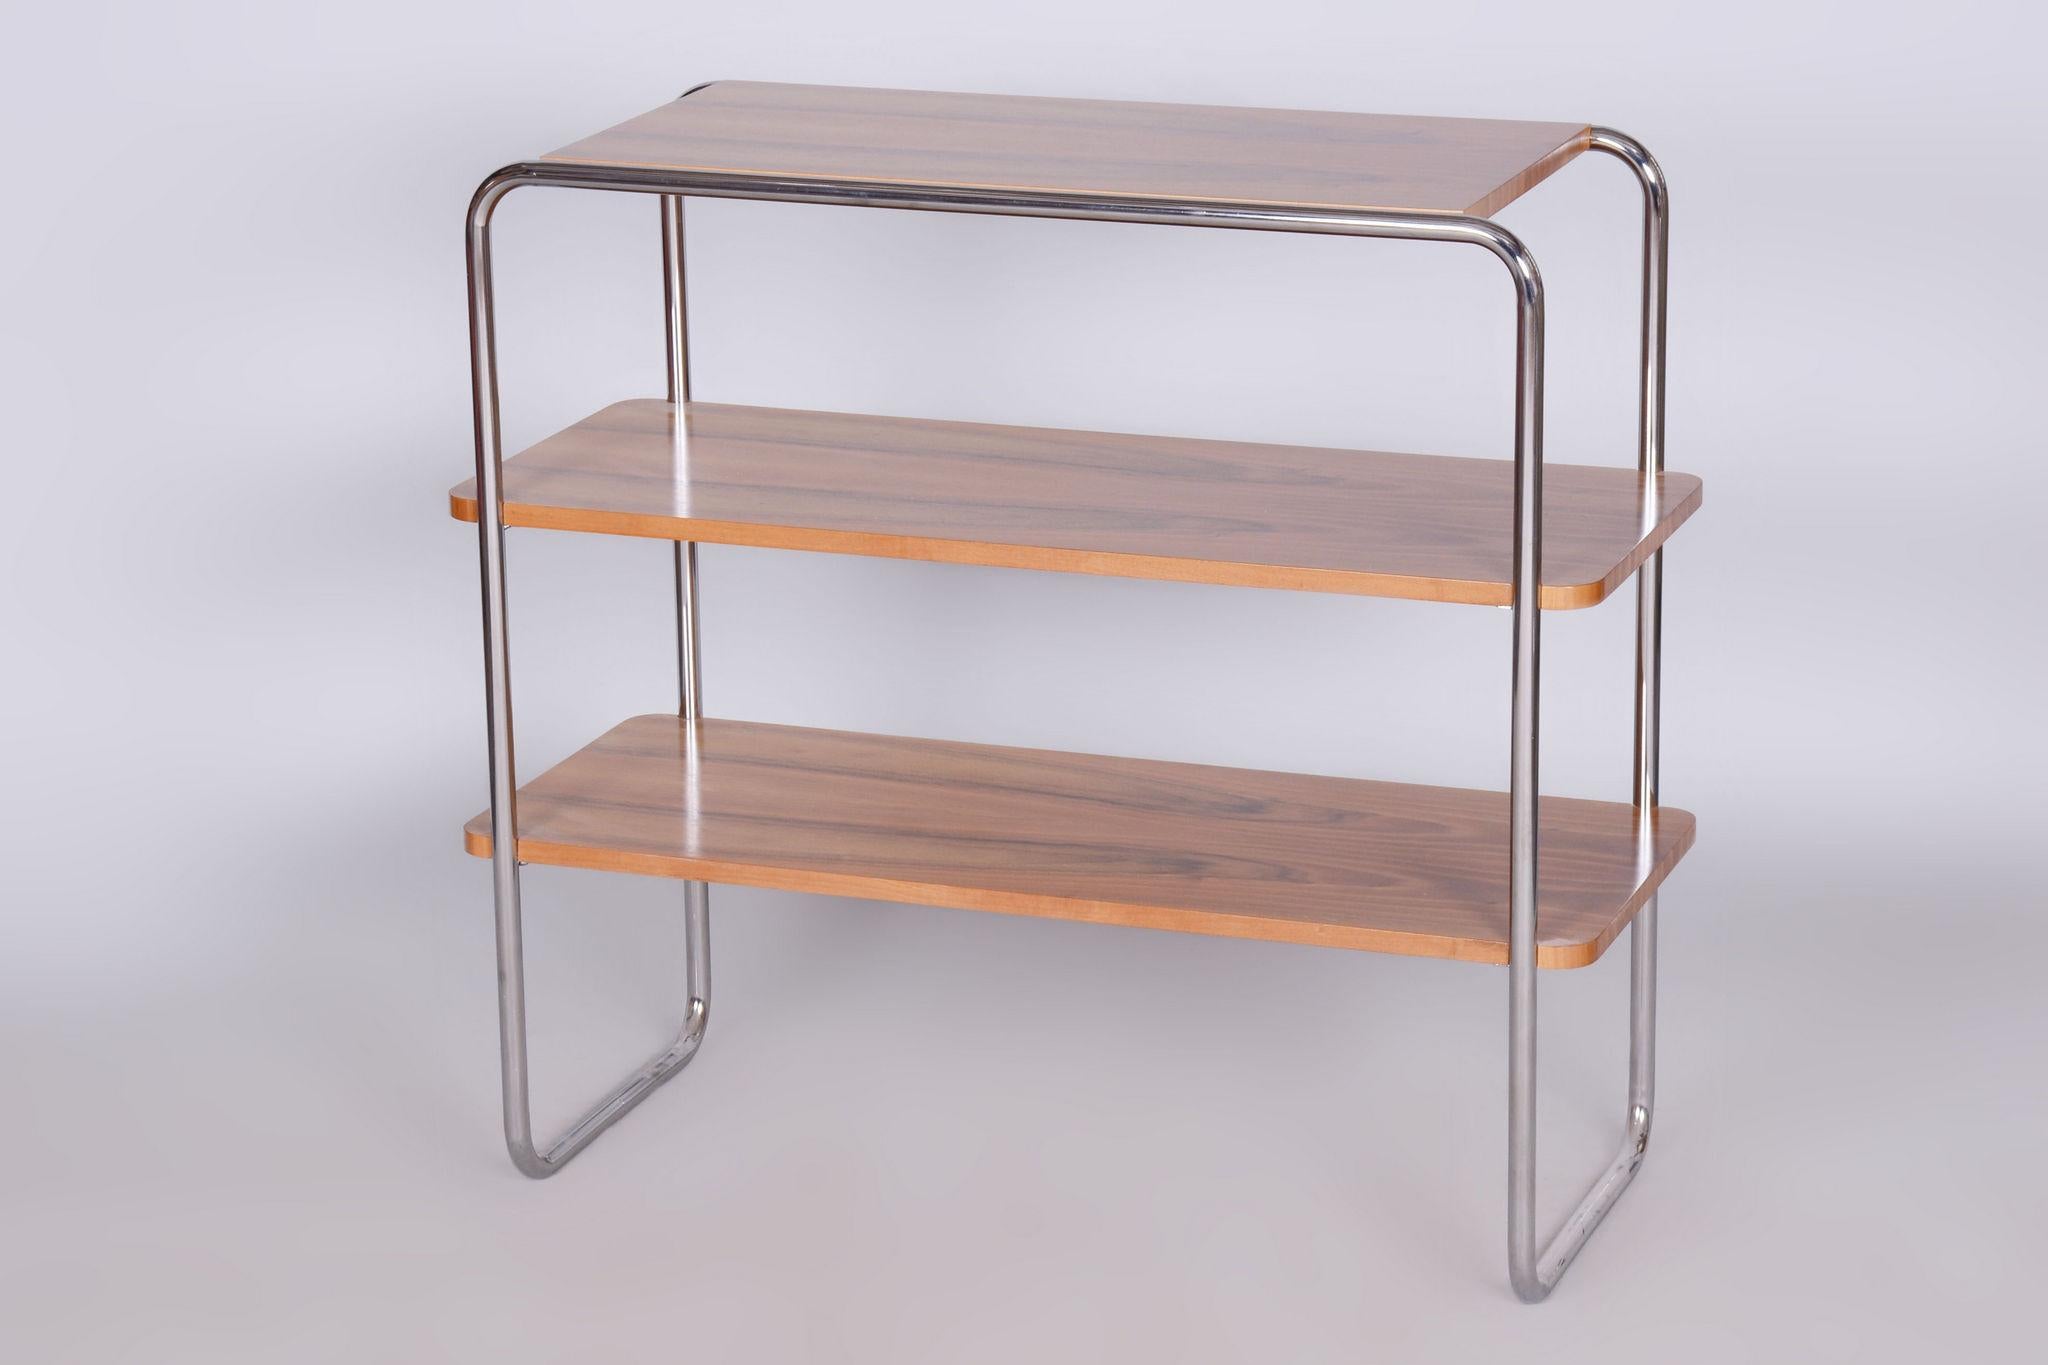 Restored Bauhaus Etagere

Made by Kovona, a renowned Czech manufacturer and dealer from the 20th century.

It has been re-polished with polyutherane piano lacquer by our professional refurbishing team in Czechia according to the original